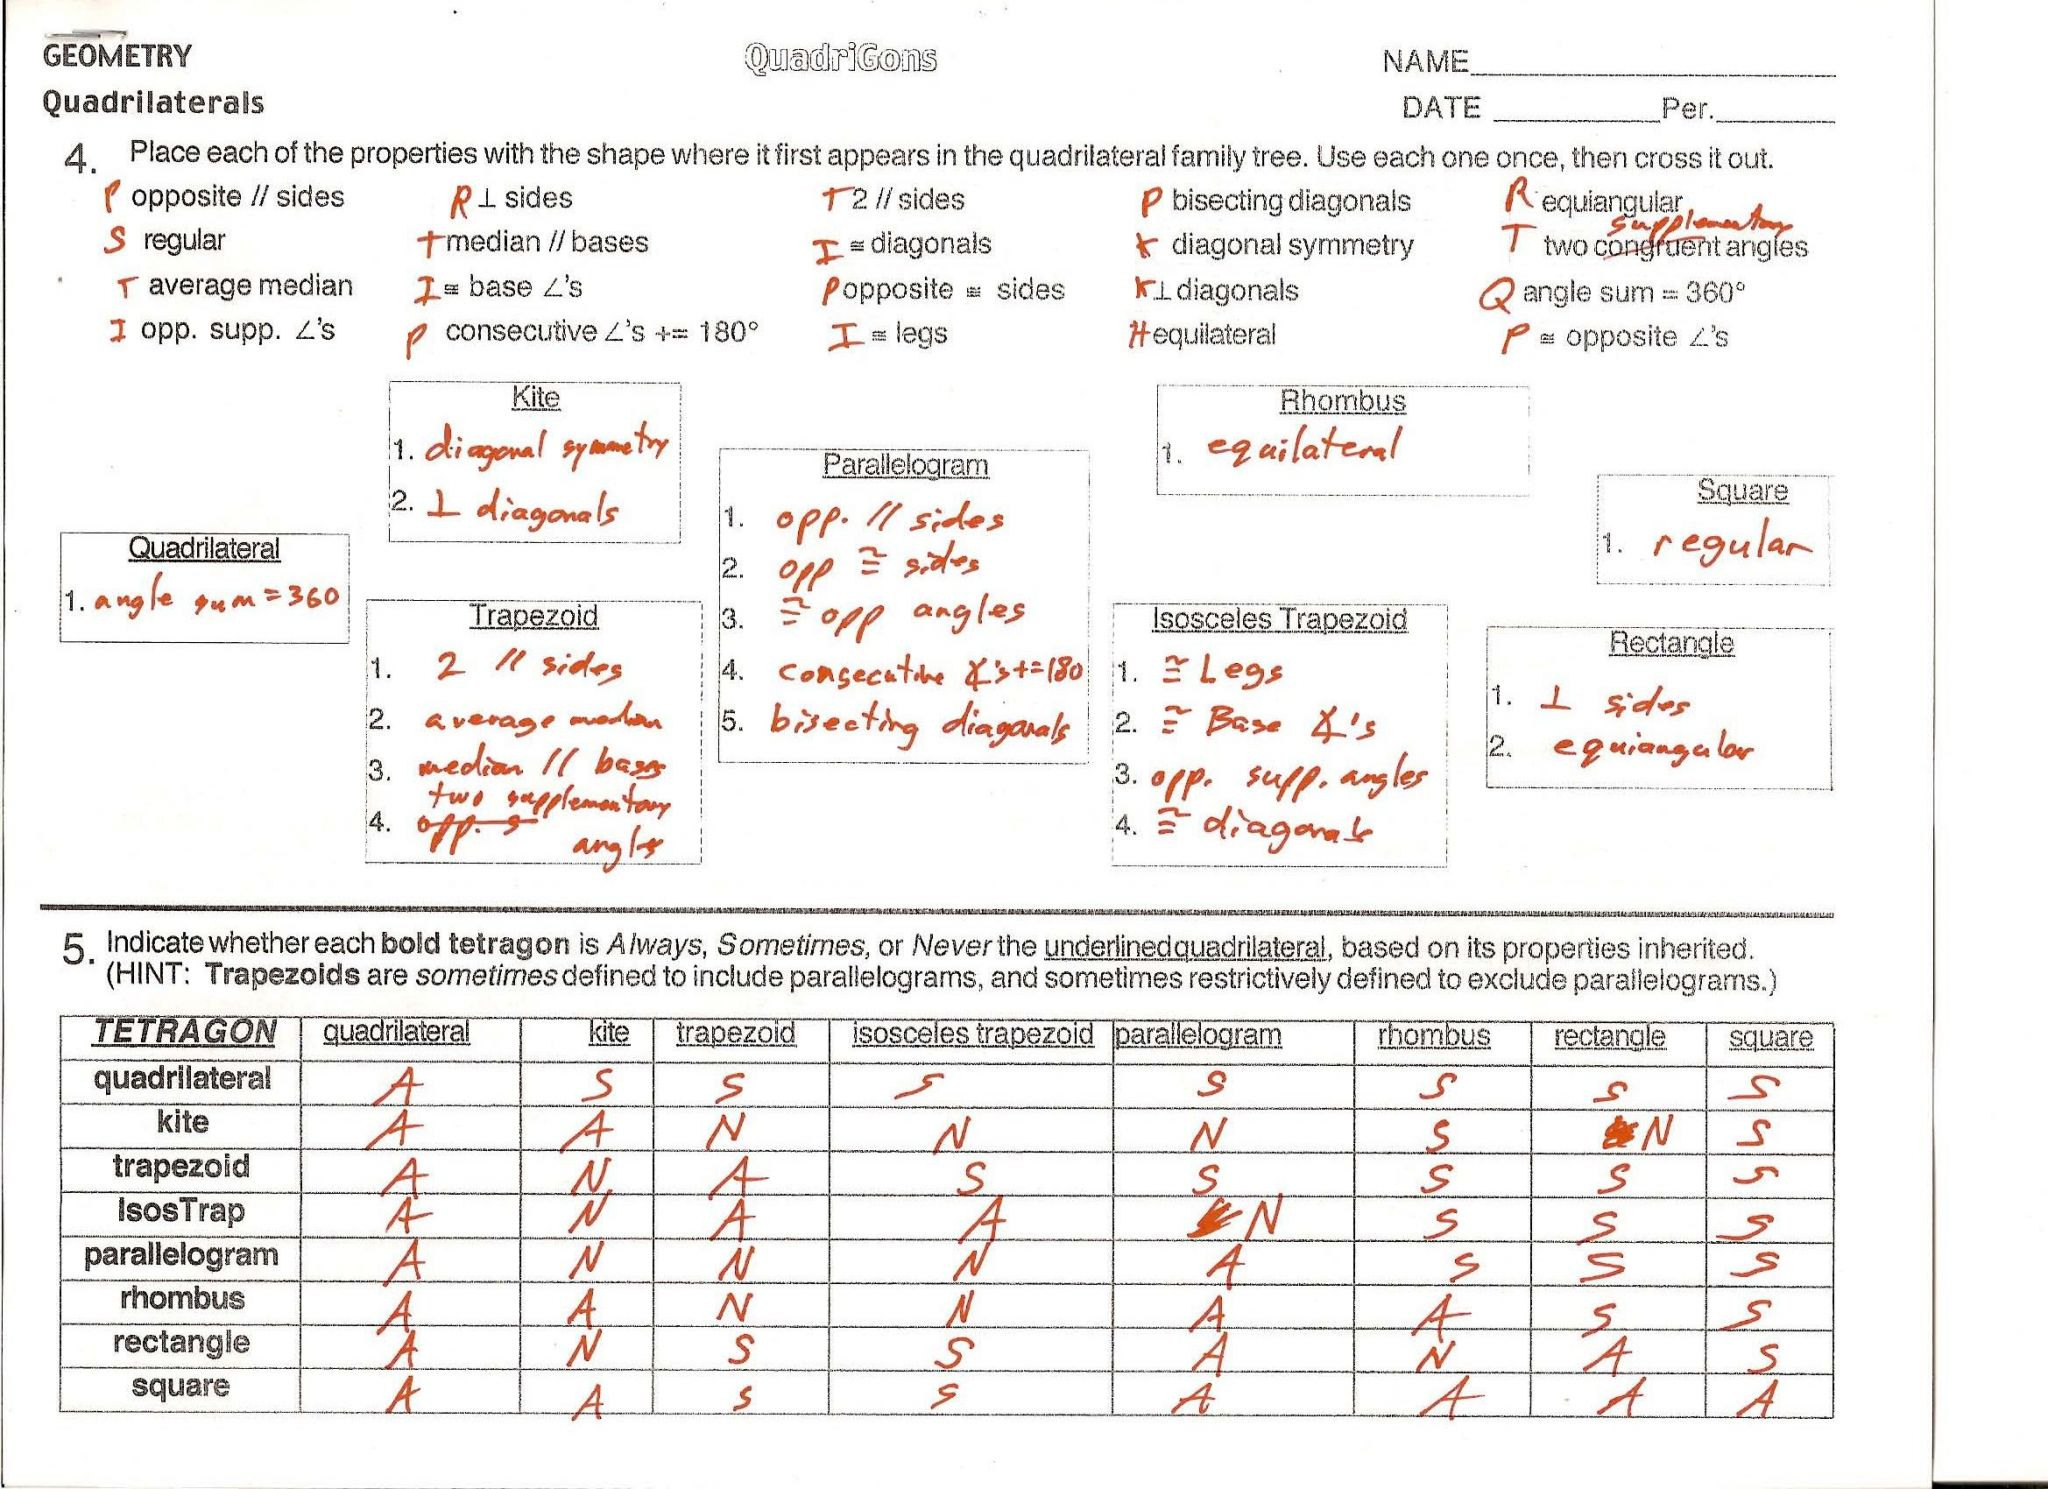 parallel-perpendicular-or-neither-worksheet-answer-key-db-excel